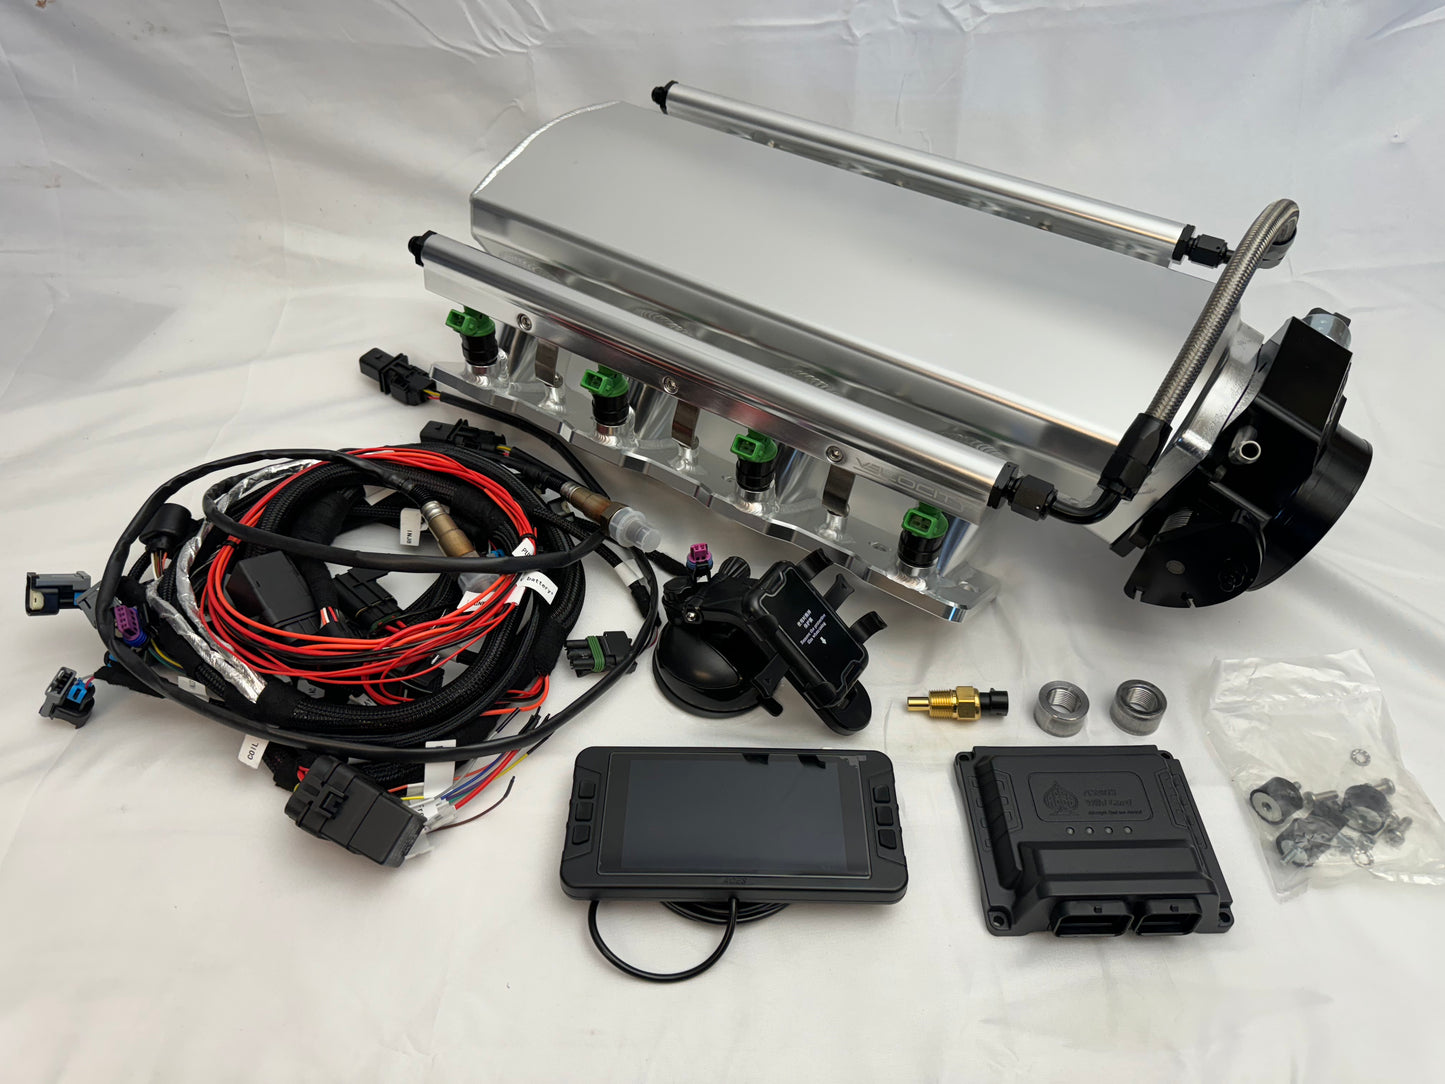 LS1/LS2/LS6 Low Profile Fabricated Fuel Injection Package w/Aces Jackpot ECU